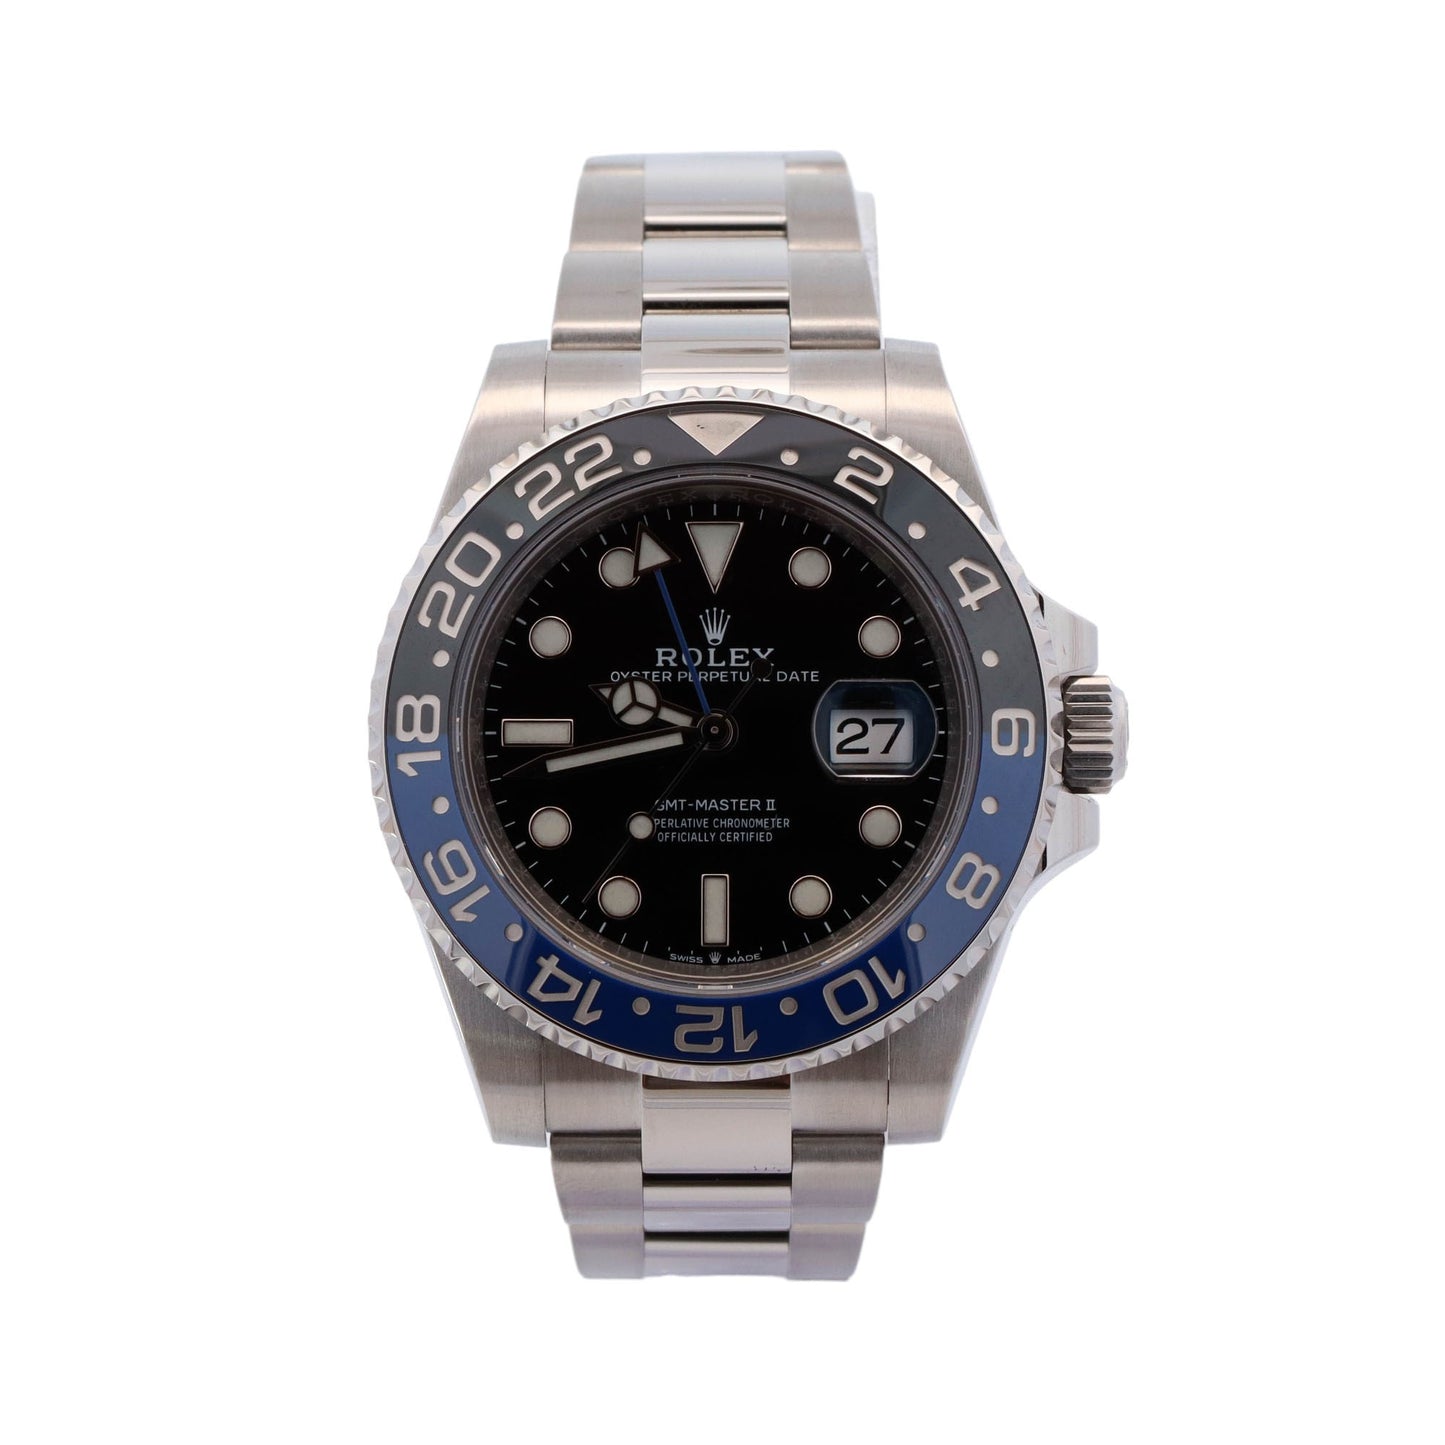 Rolex GMT Master II Stainless Steel 40mm Black Dot Dial Watch Reference #: 126710BLNR - Happy Jewelers Fine Jewelry Lifetime Warranty